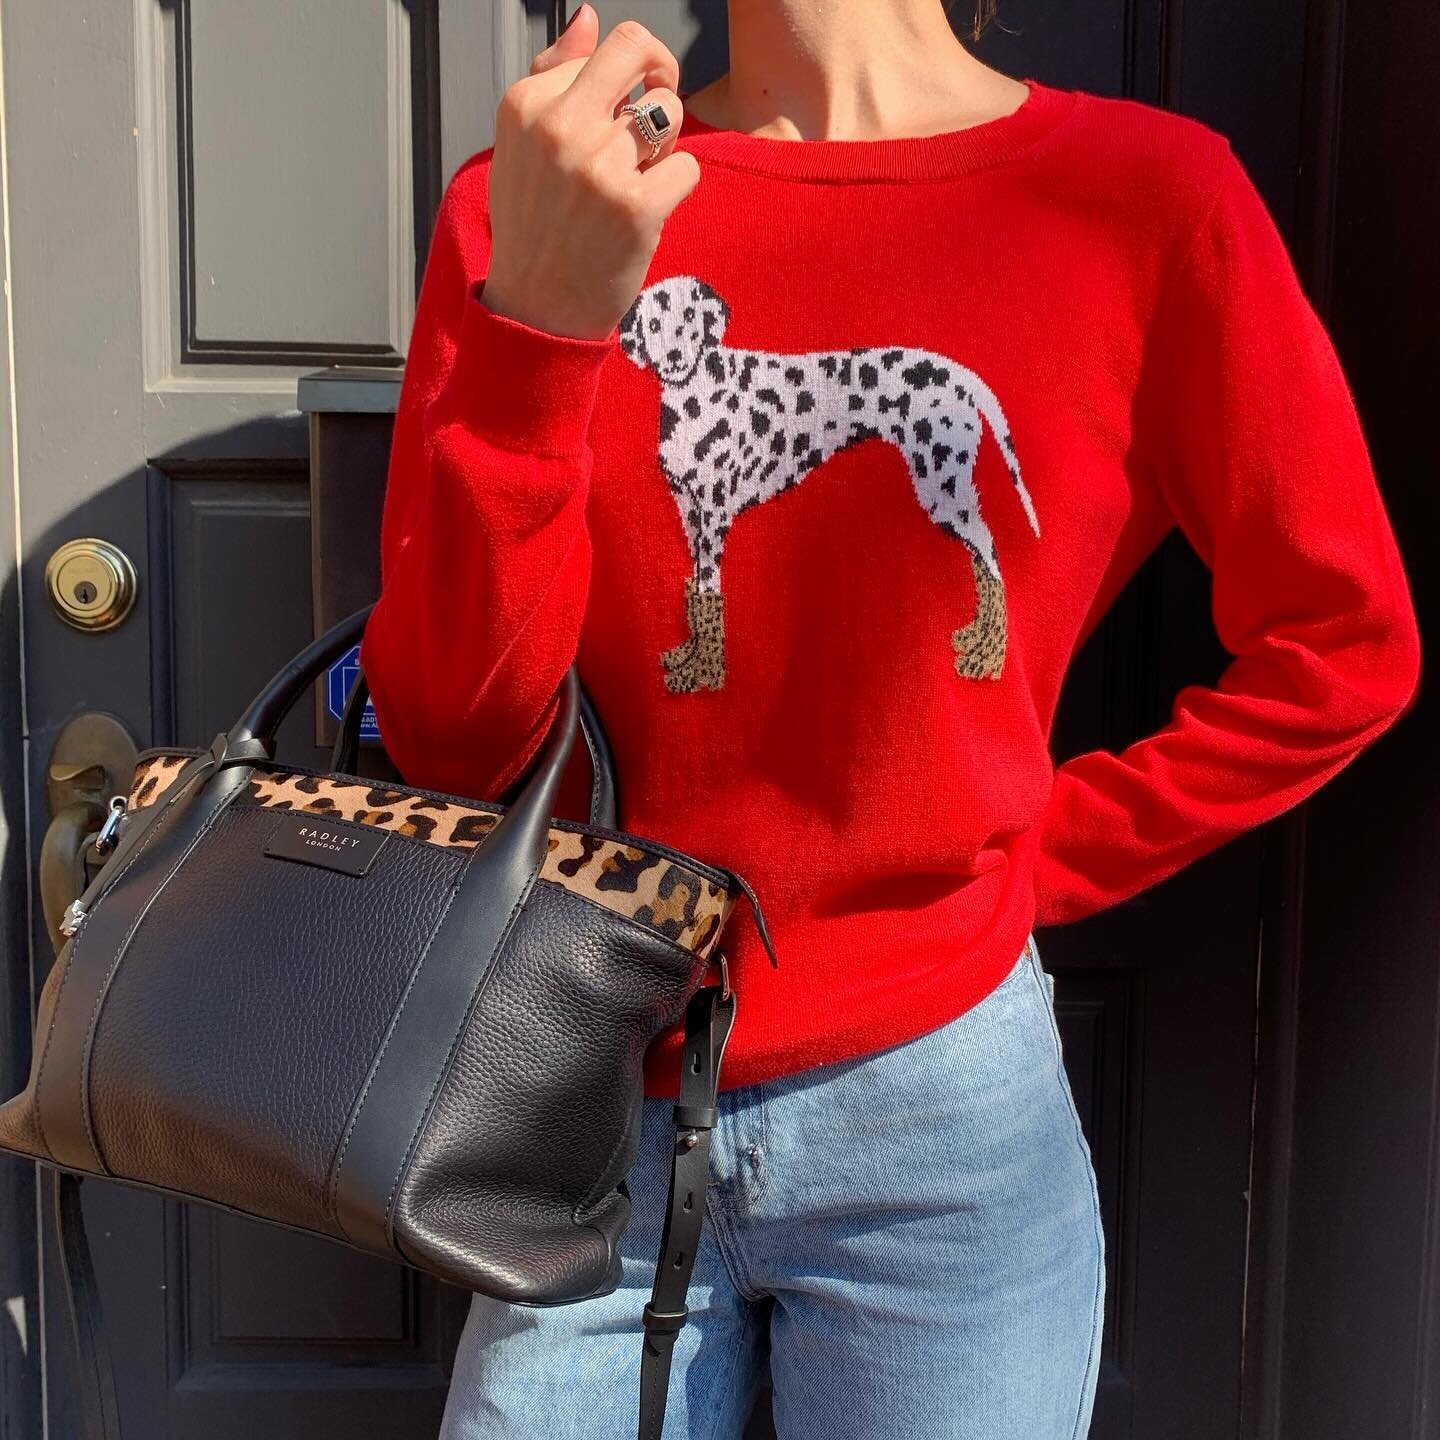 &hellip;and we have plenty more red sweaters where that came from ❤️🖤❤️

Shop the looks:

NWT Designer Leather &amp; cheetah print bag: $86.95

J Crew Dalmatian sweater: size medium, $22.95

Designer calf hair loafers: size 7, $78.95

@greenestreetr